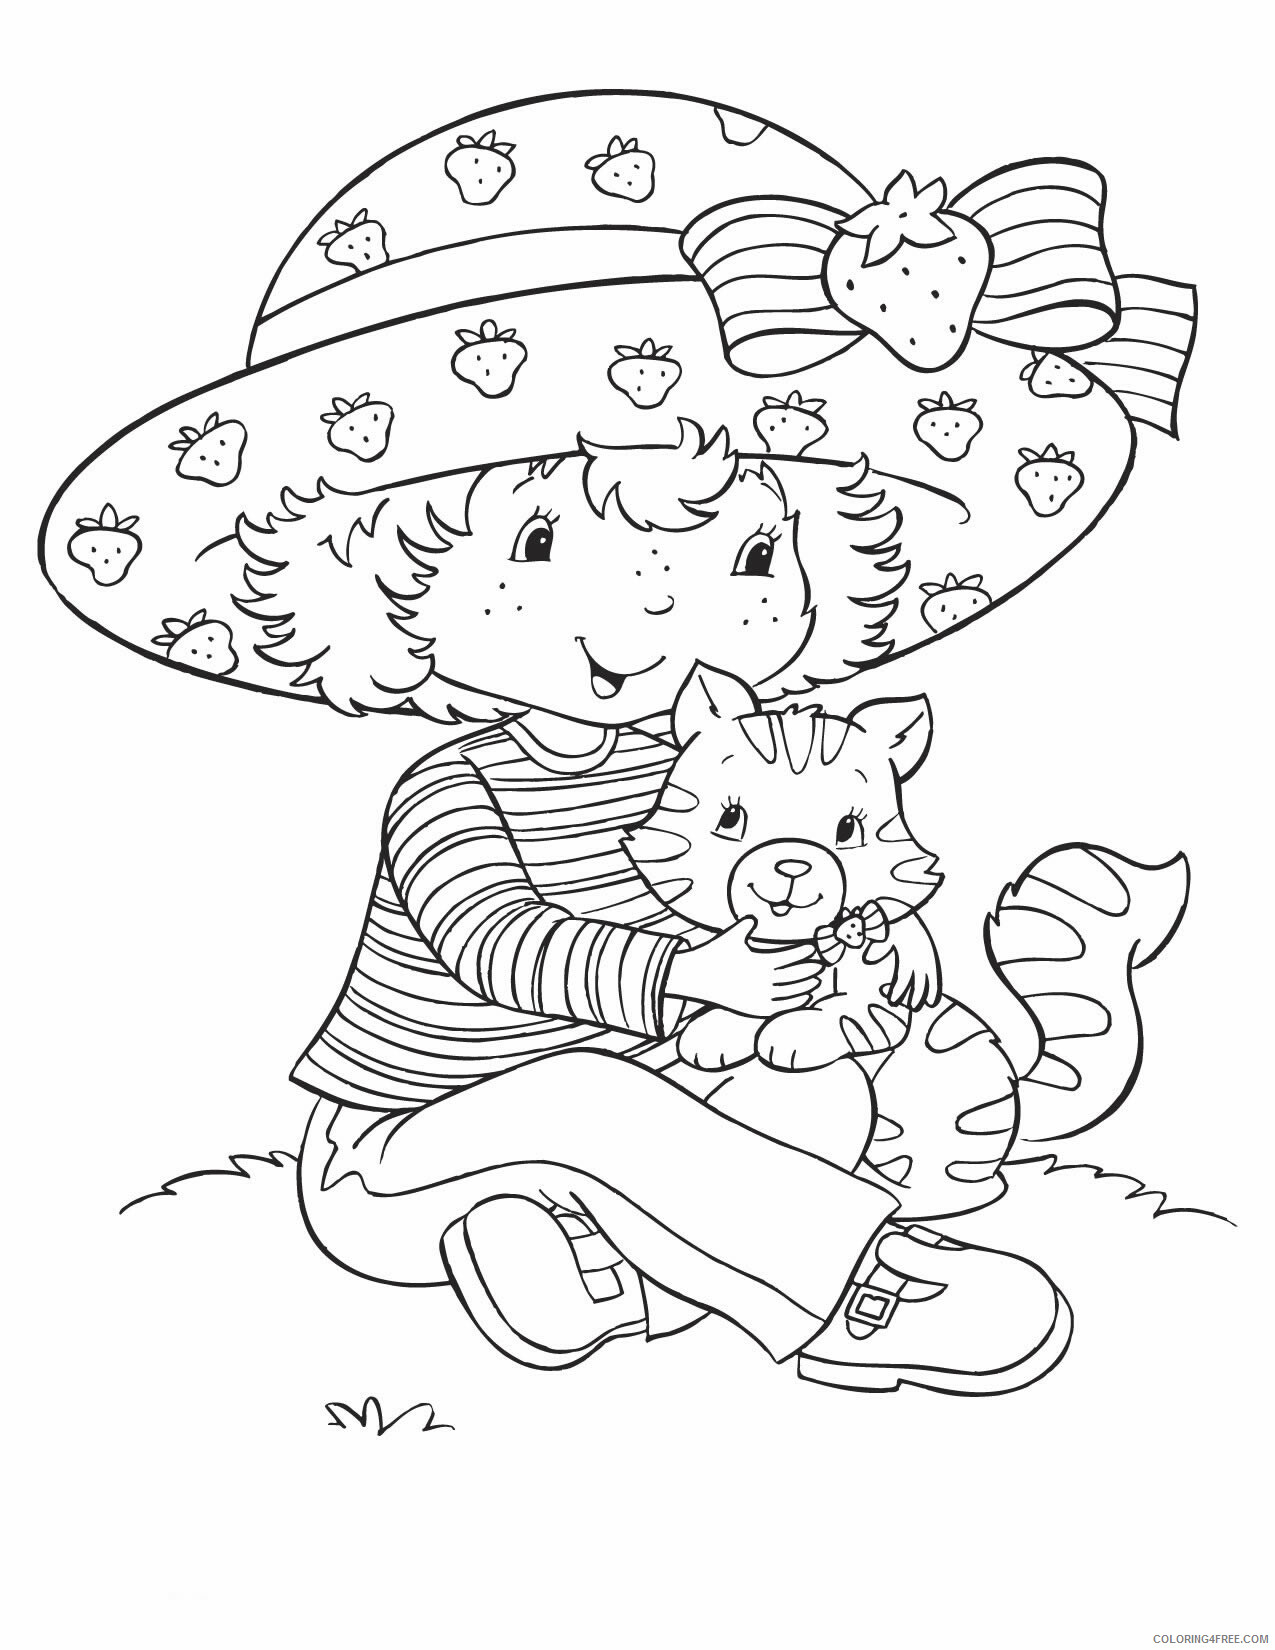 Strawberry Shortcake Coloring Pages TV Film Characters Printable 2020 08174 Coloring4free